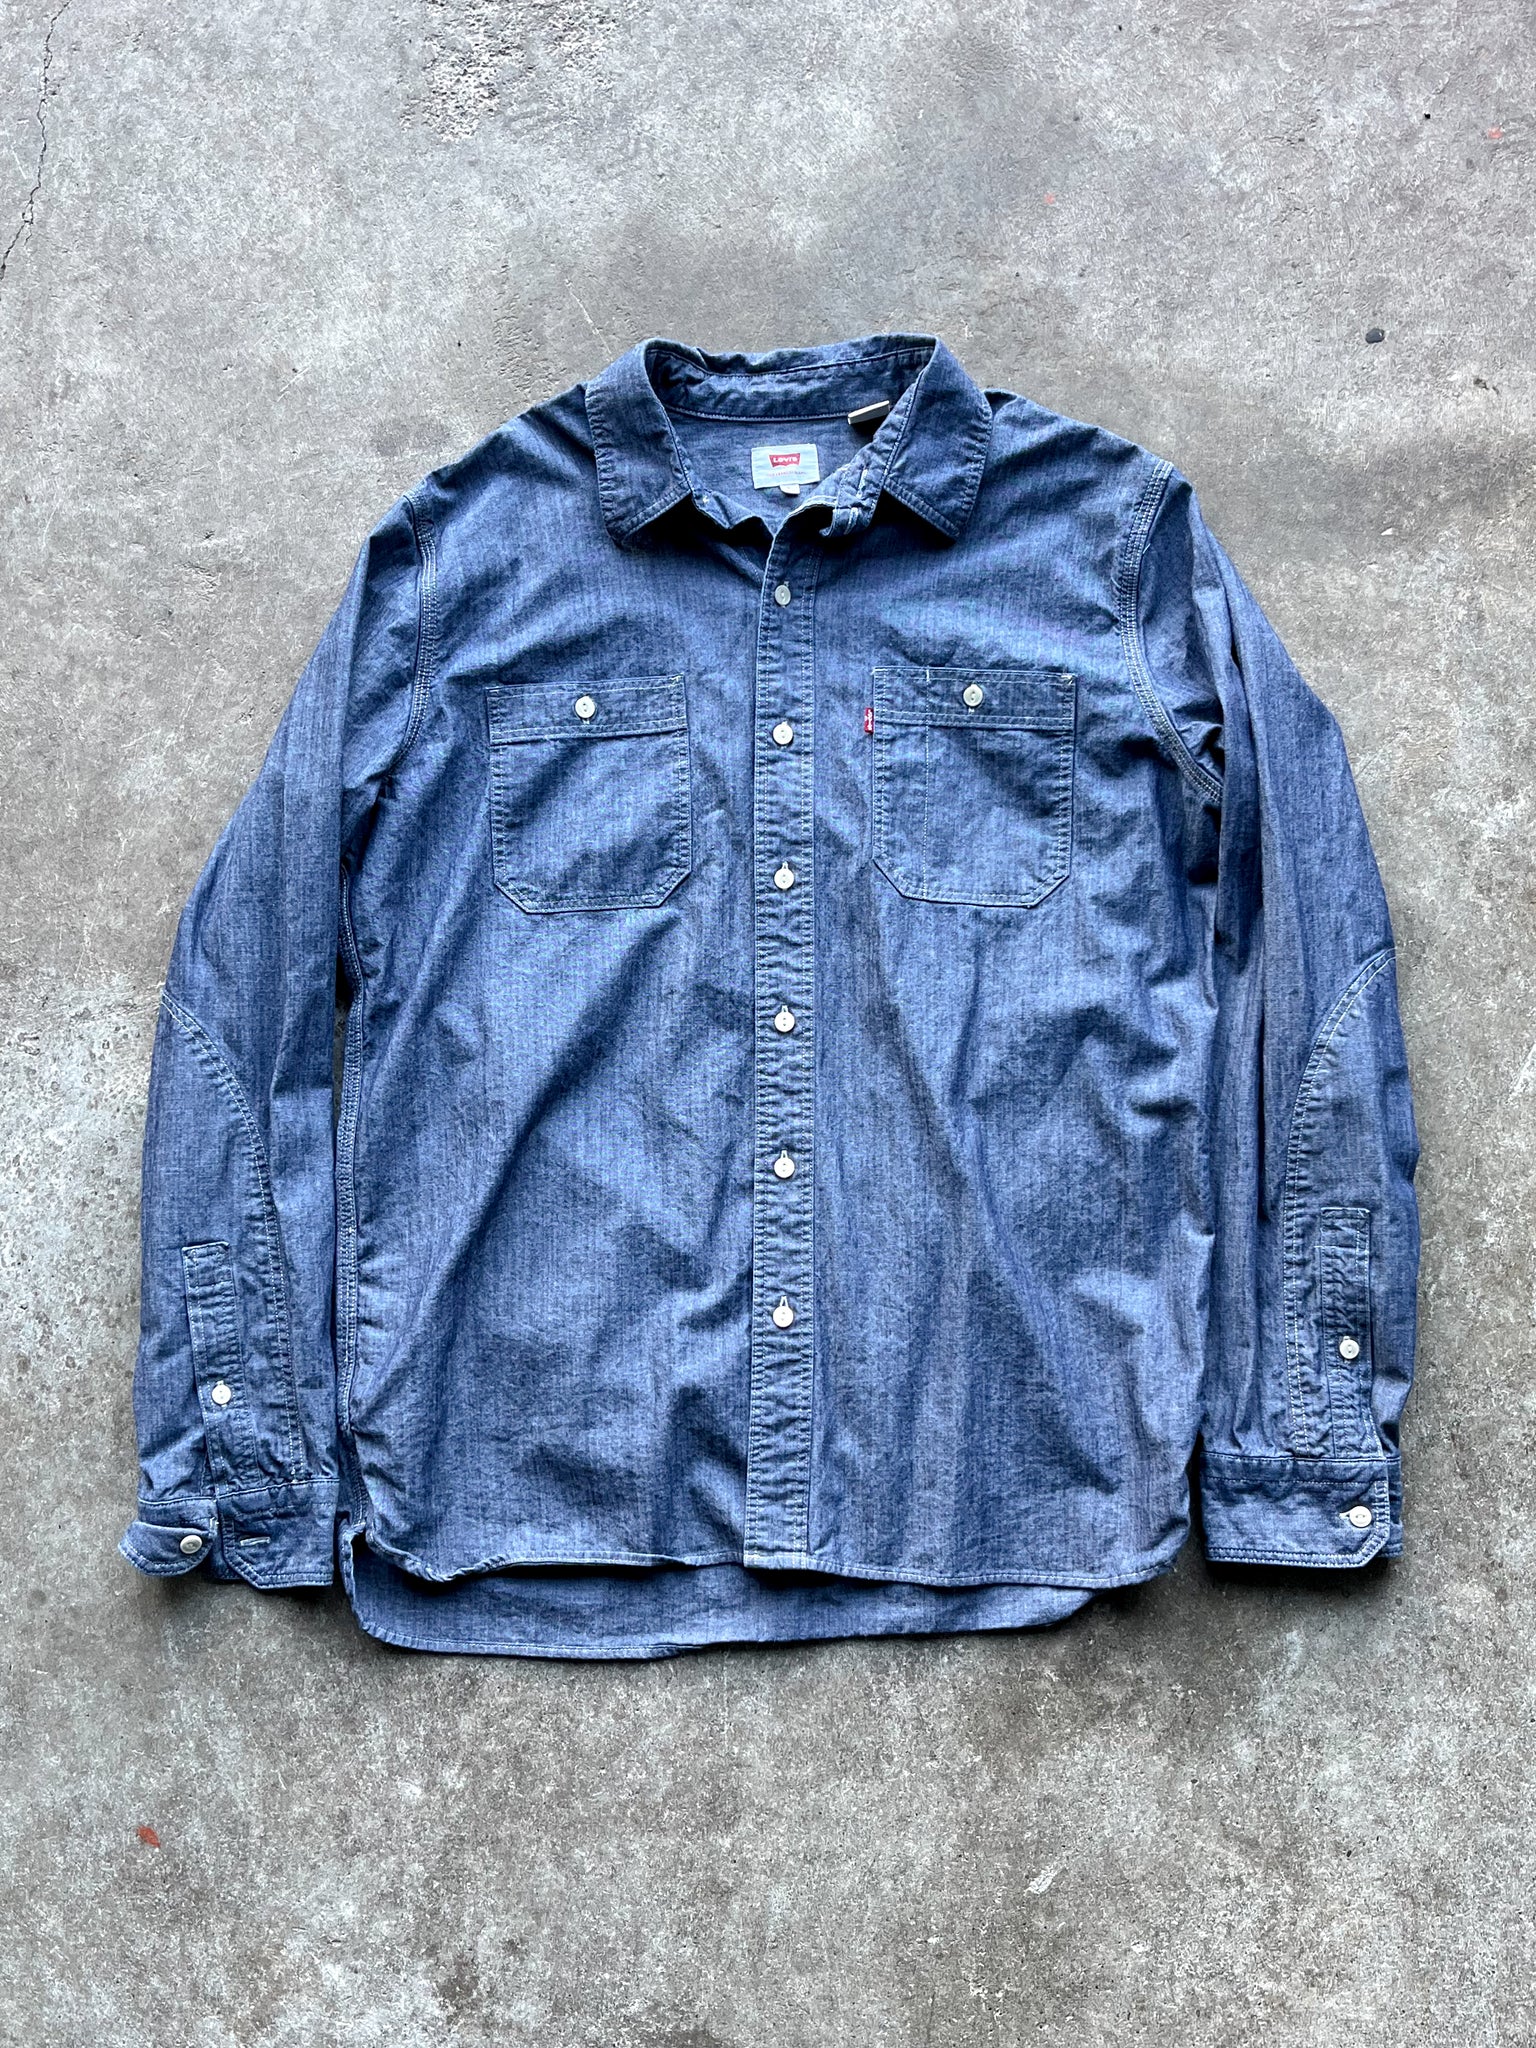 Levis Chambray Button up / LARGE